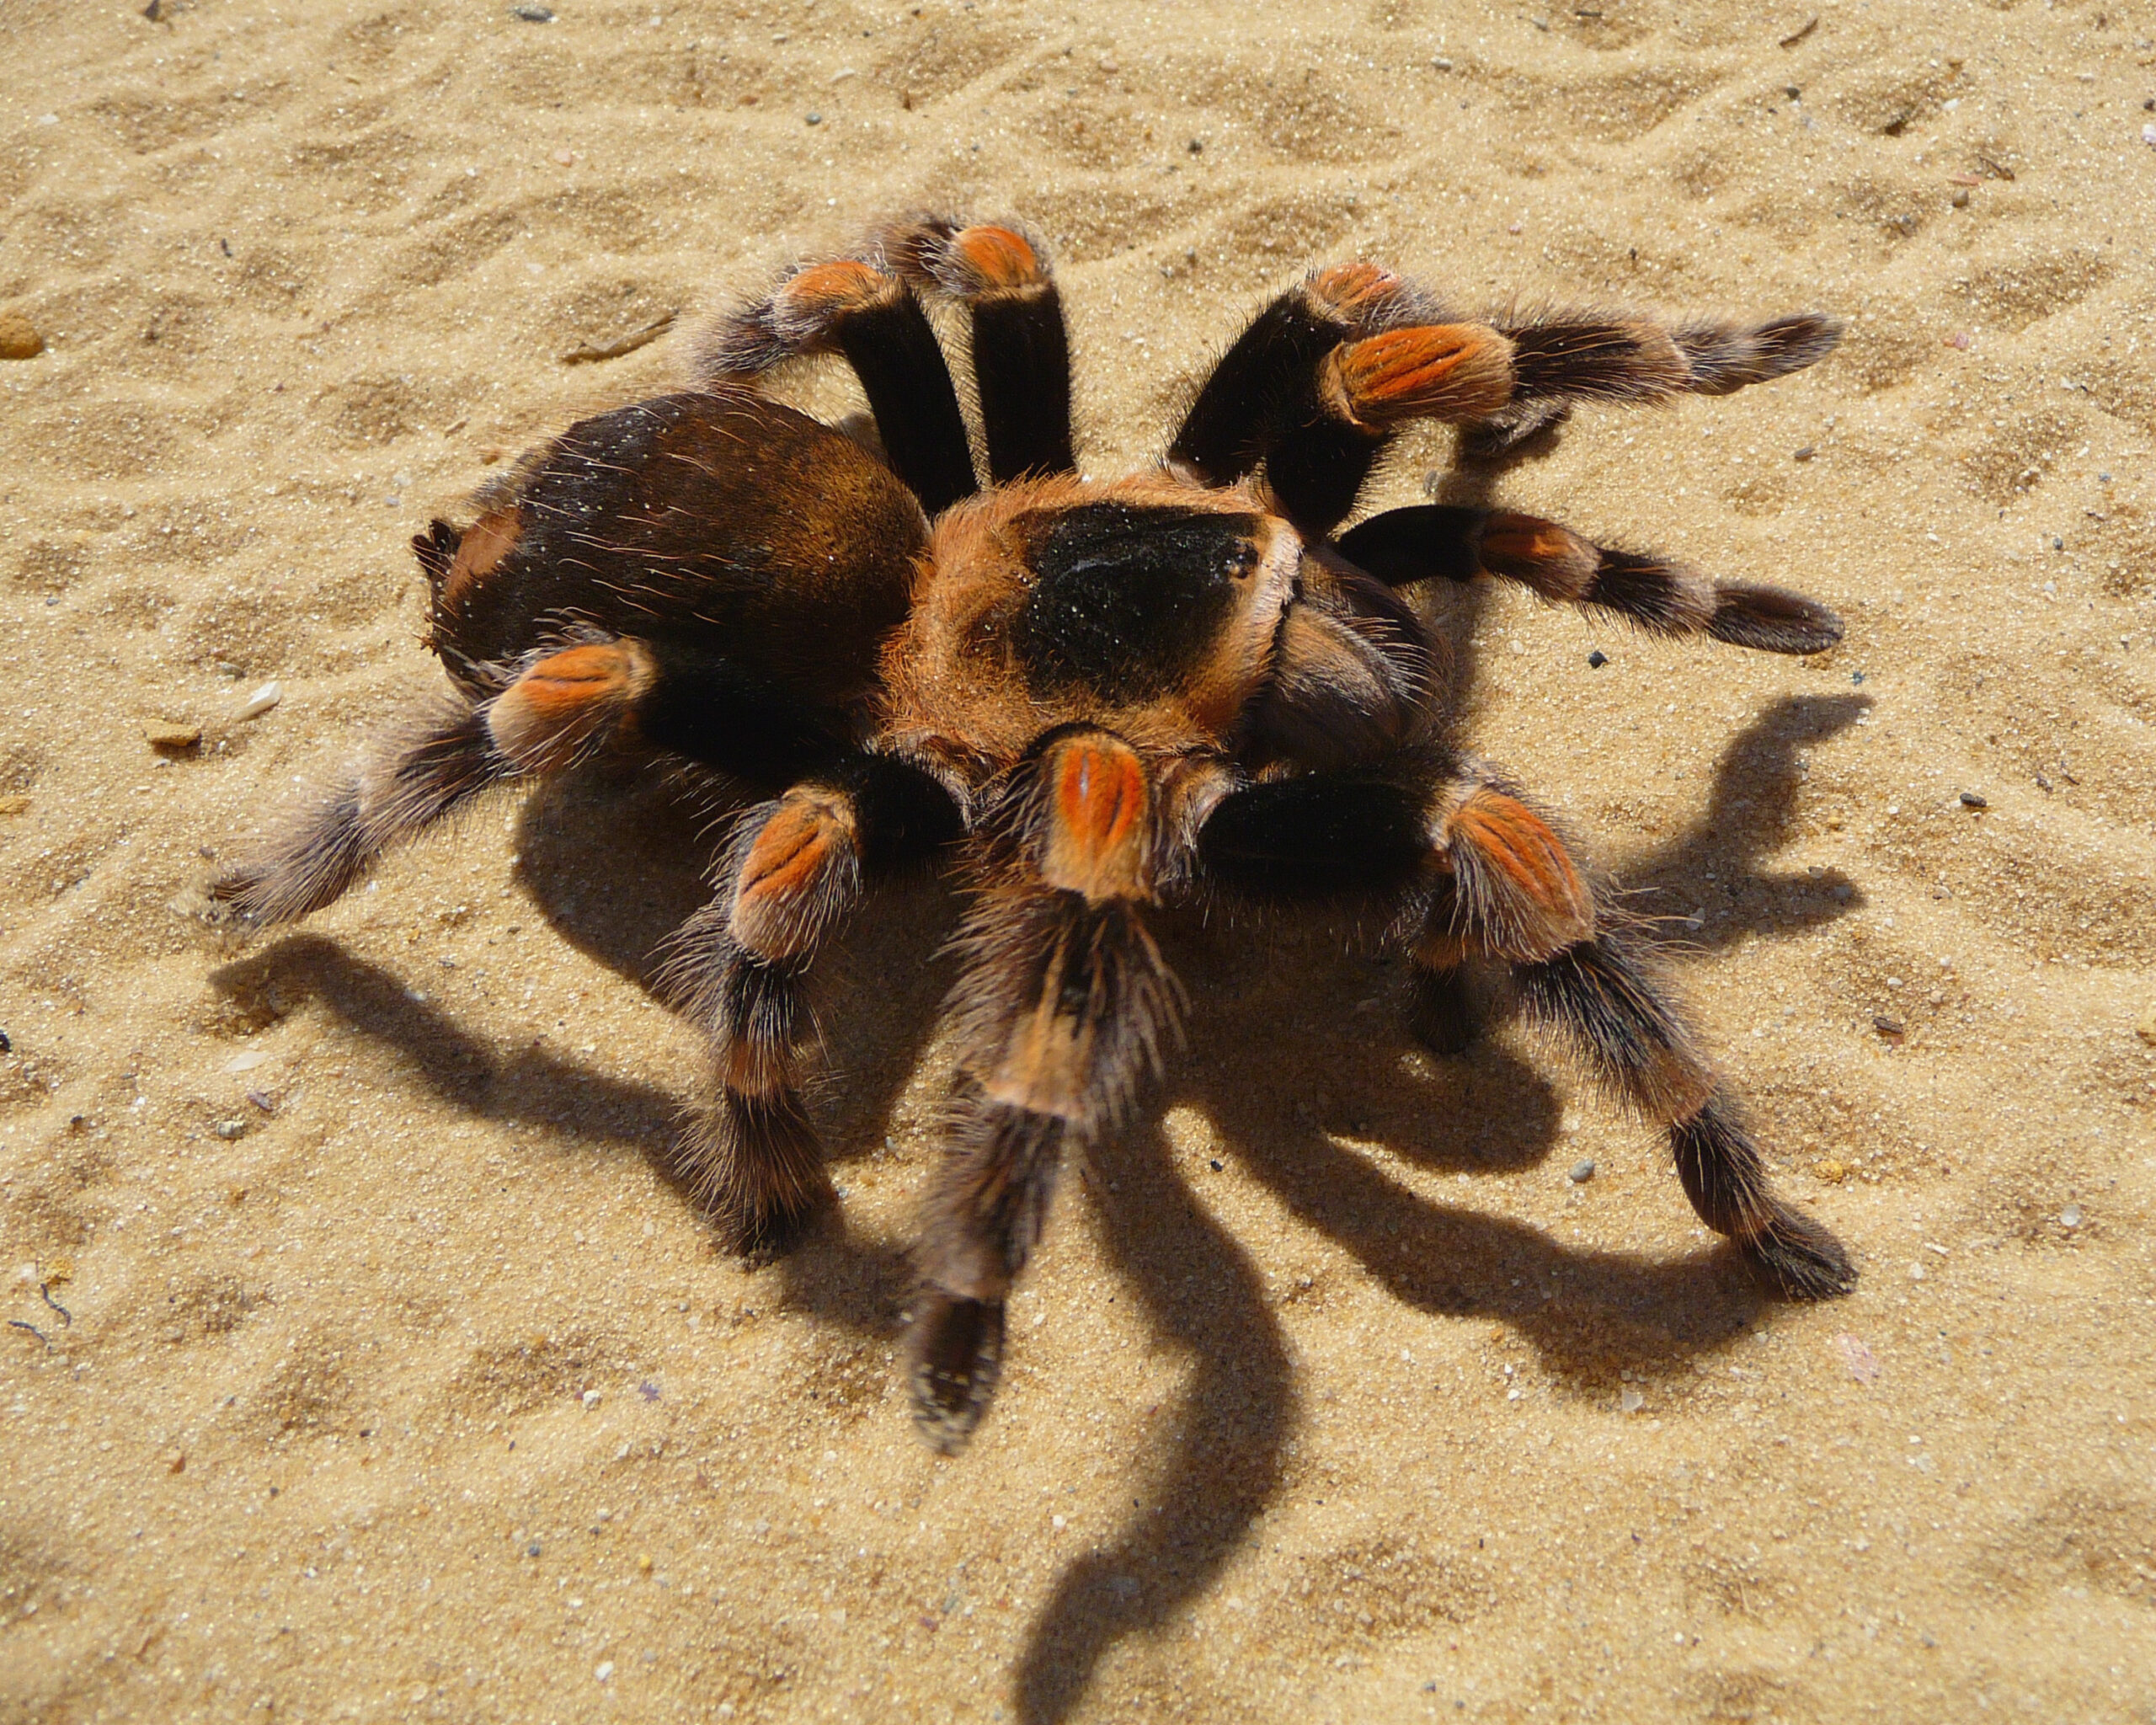 A Mexican Red Knee Tarantula, scientifically known as Brachypelma smithi, running on yellow sand. The tarantula has a dark brown body with reddish-orange joints on its legs and its long black hairy legs are visible as it moves.